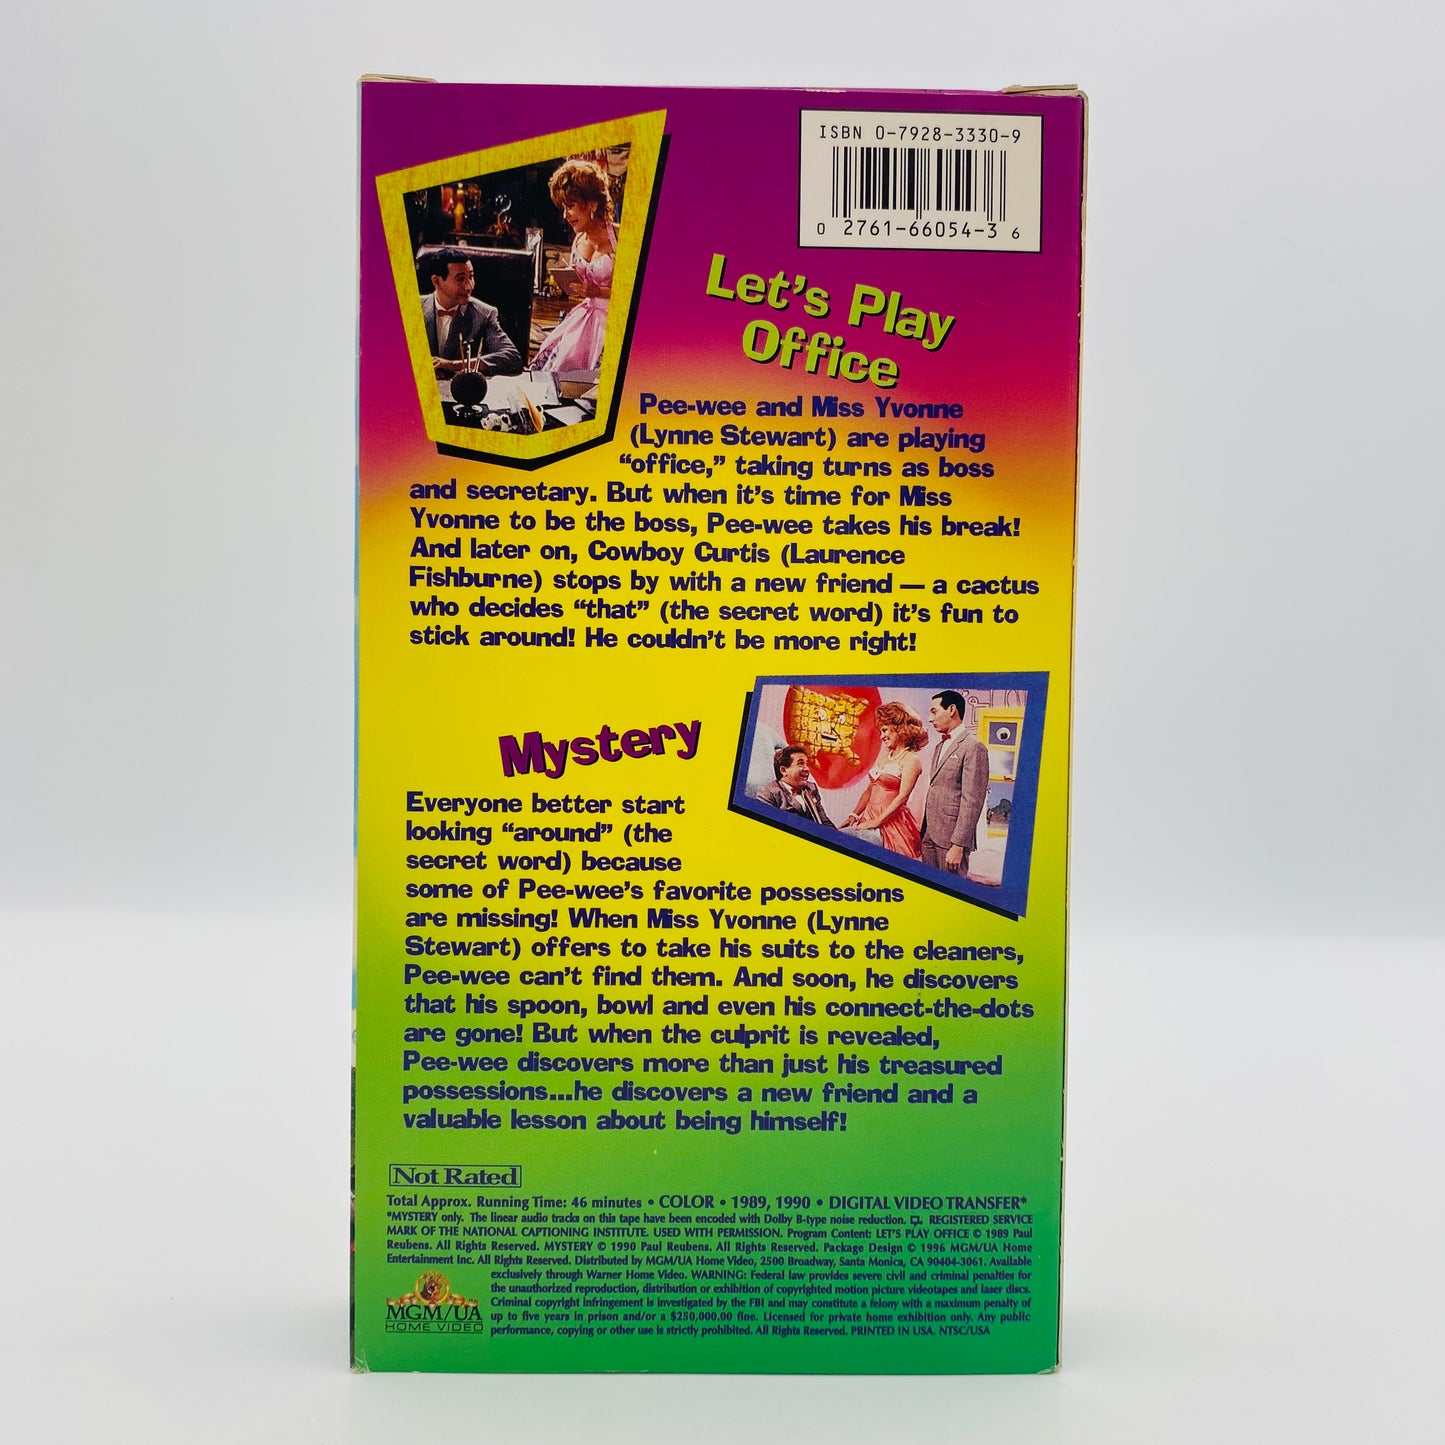 Pee-Wee’s Playhouse volume 10 VHS tape (1996) MGM/UA Home Video